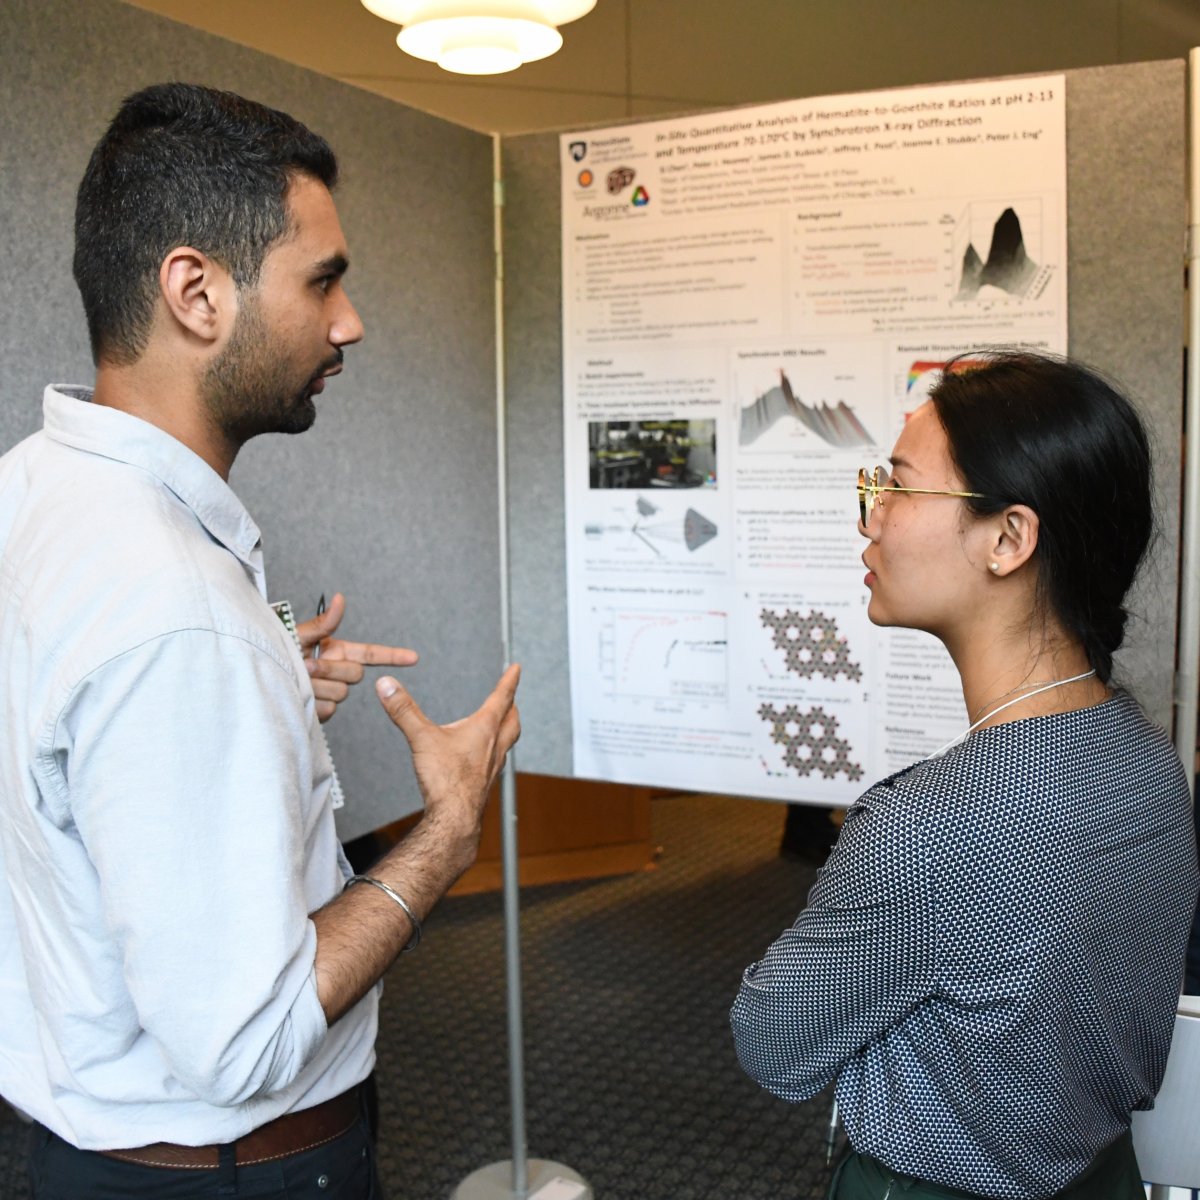 Two people speaking at poster session